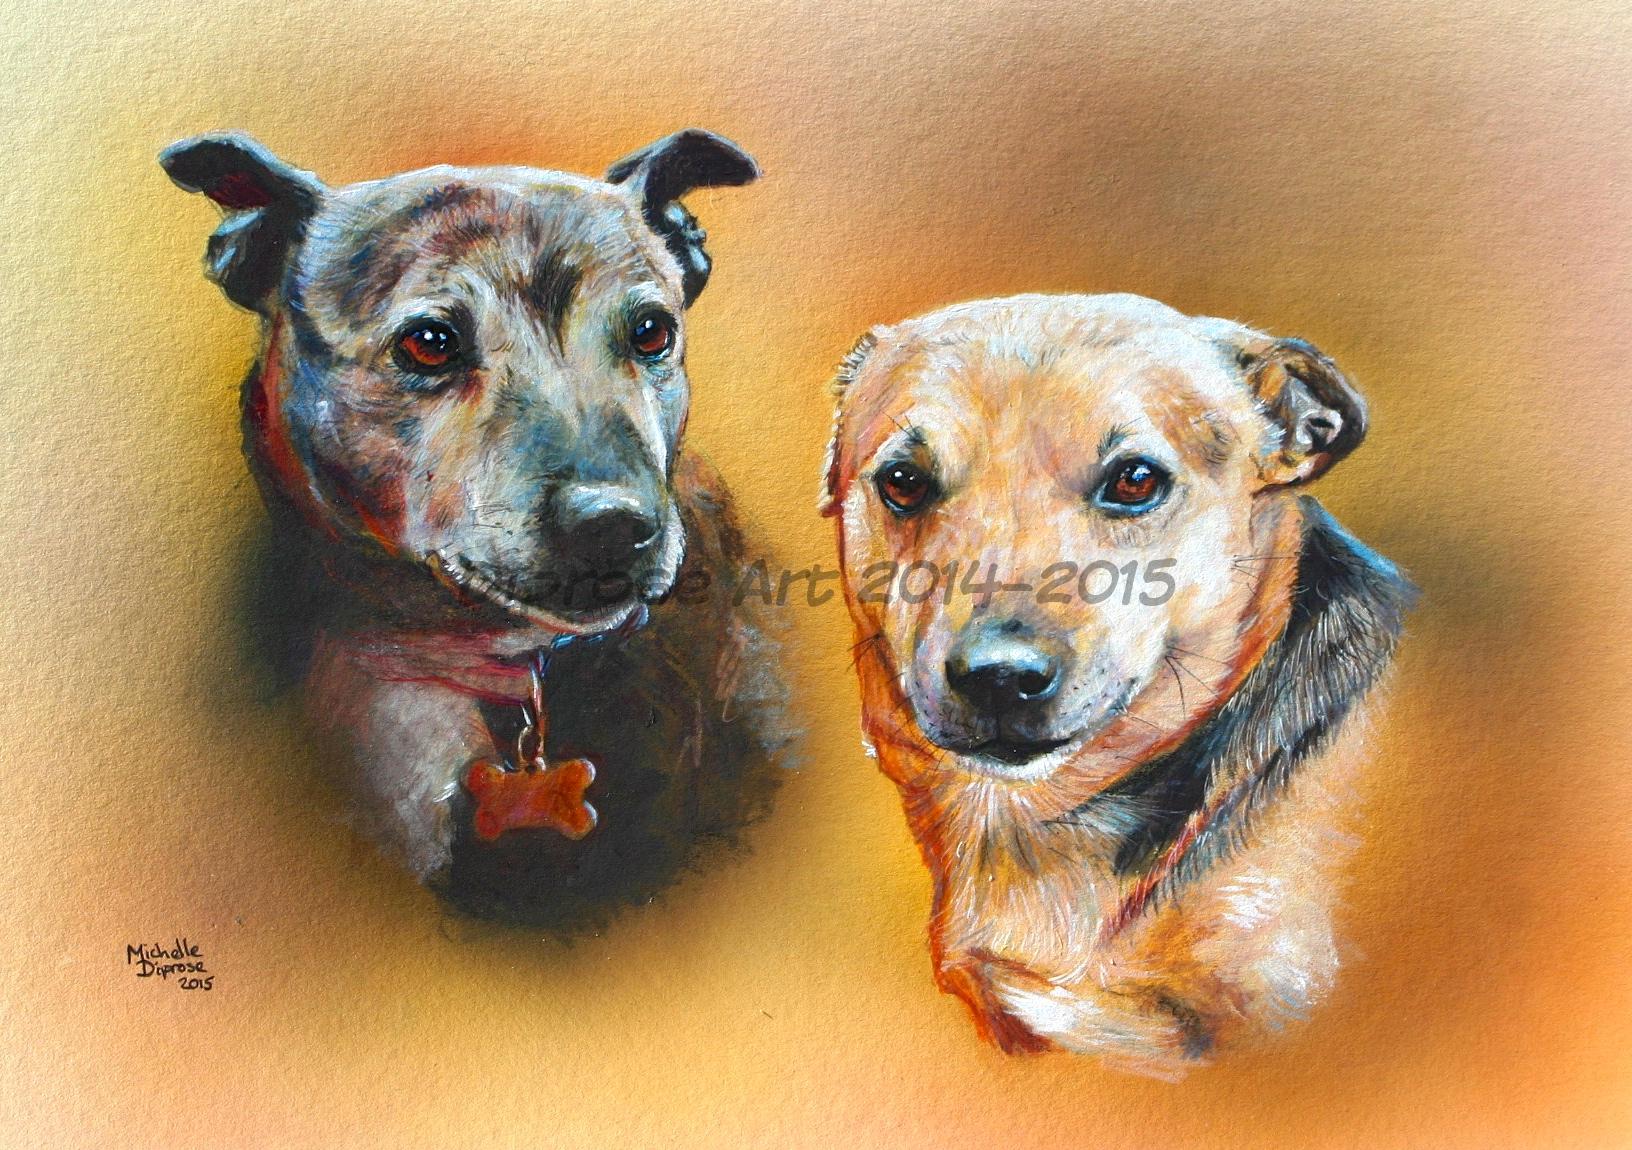 Acrylics on board - approx A4 - pet dog portrait - These lovely old dogs are incredible - one of them is 17 years old which I think is amazing and they still look beautiful.  I love older dogs especially as I have a grand old boy myself.